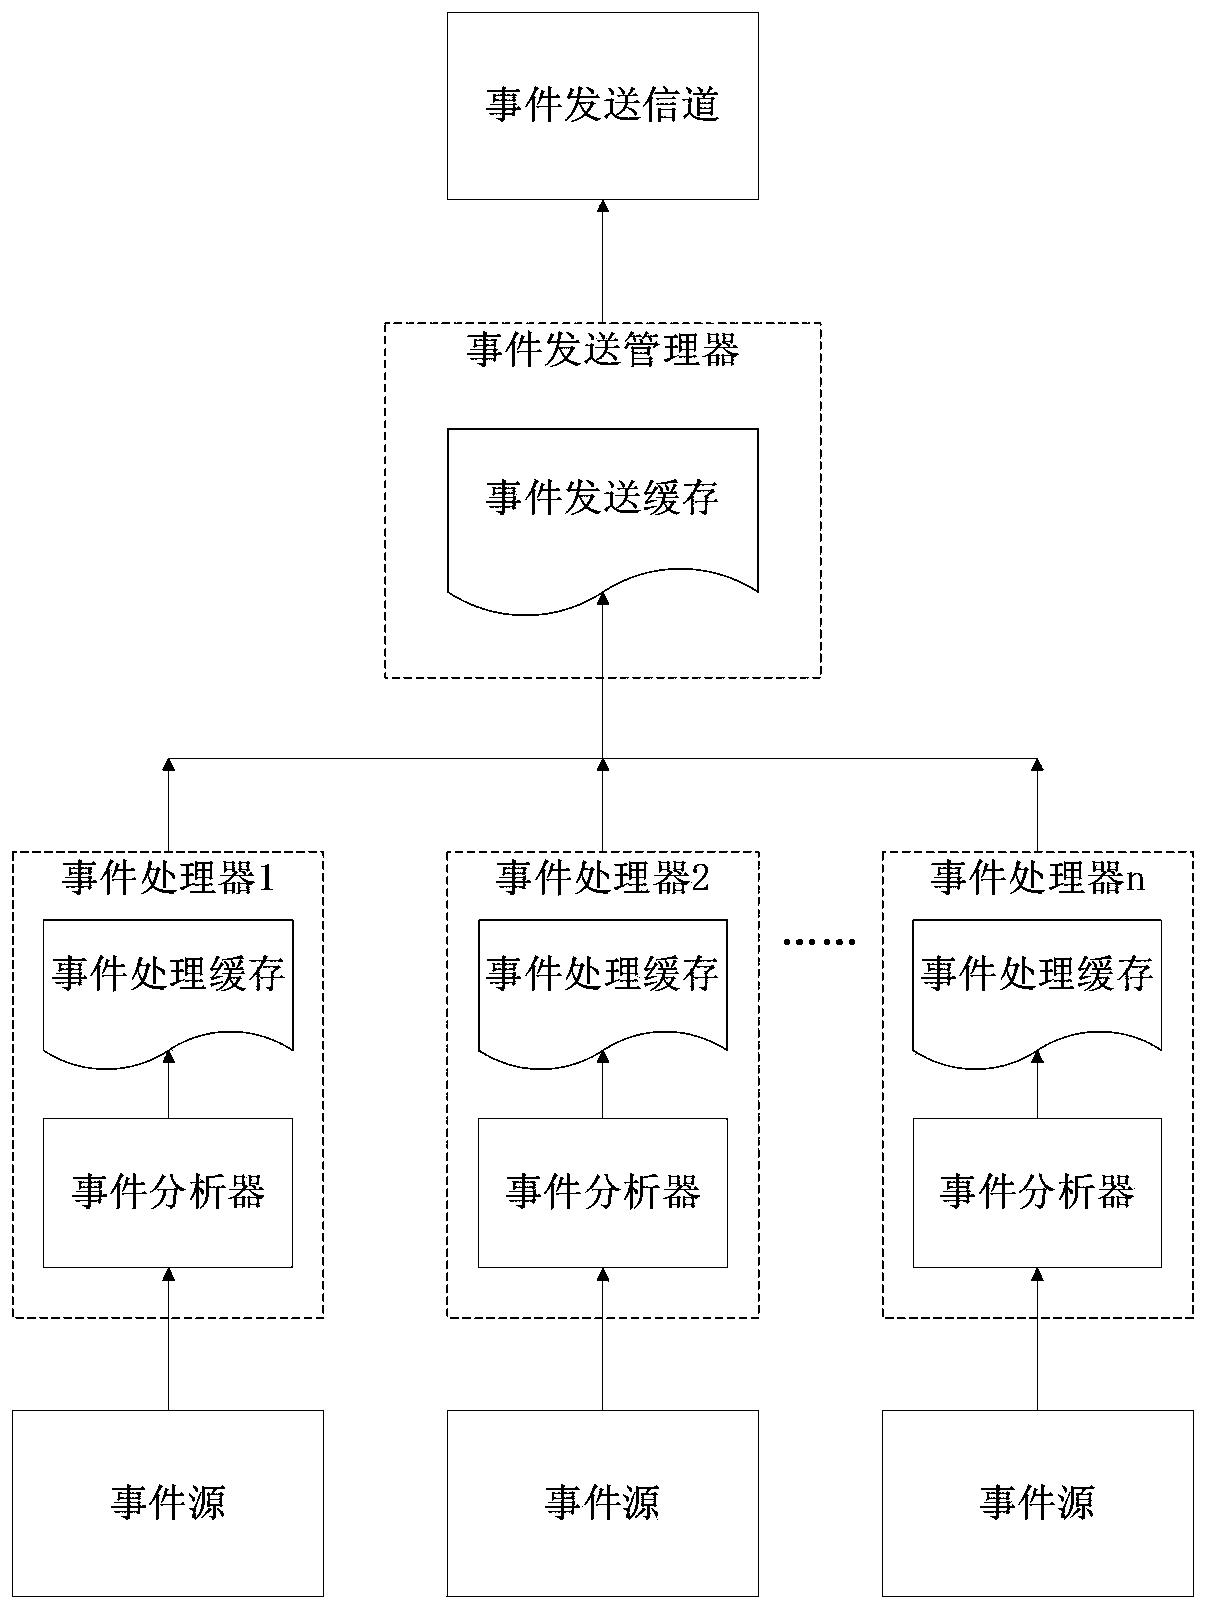 Dynamic weighted event processing system and method